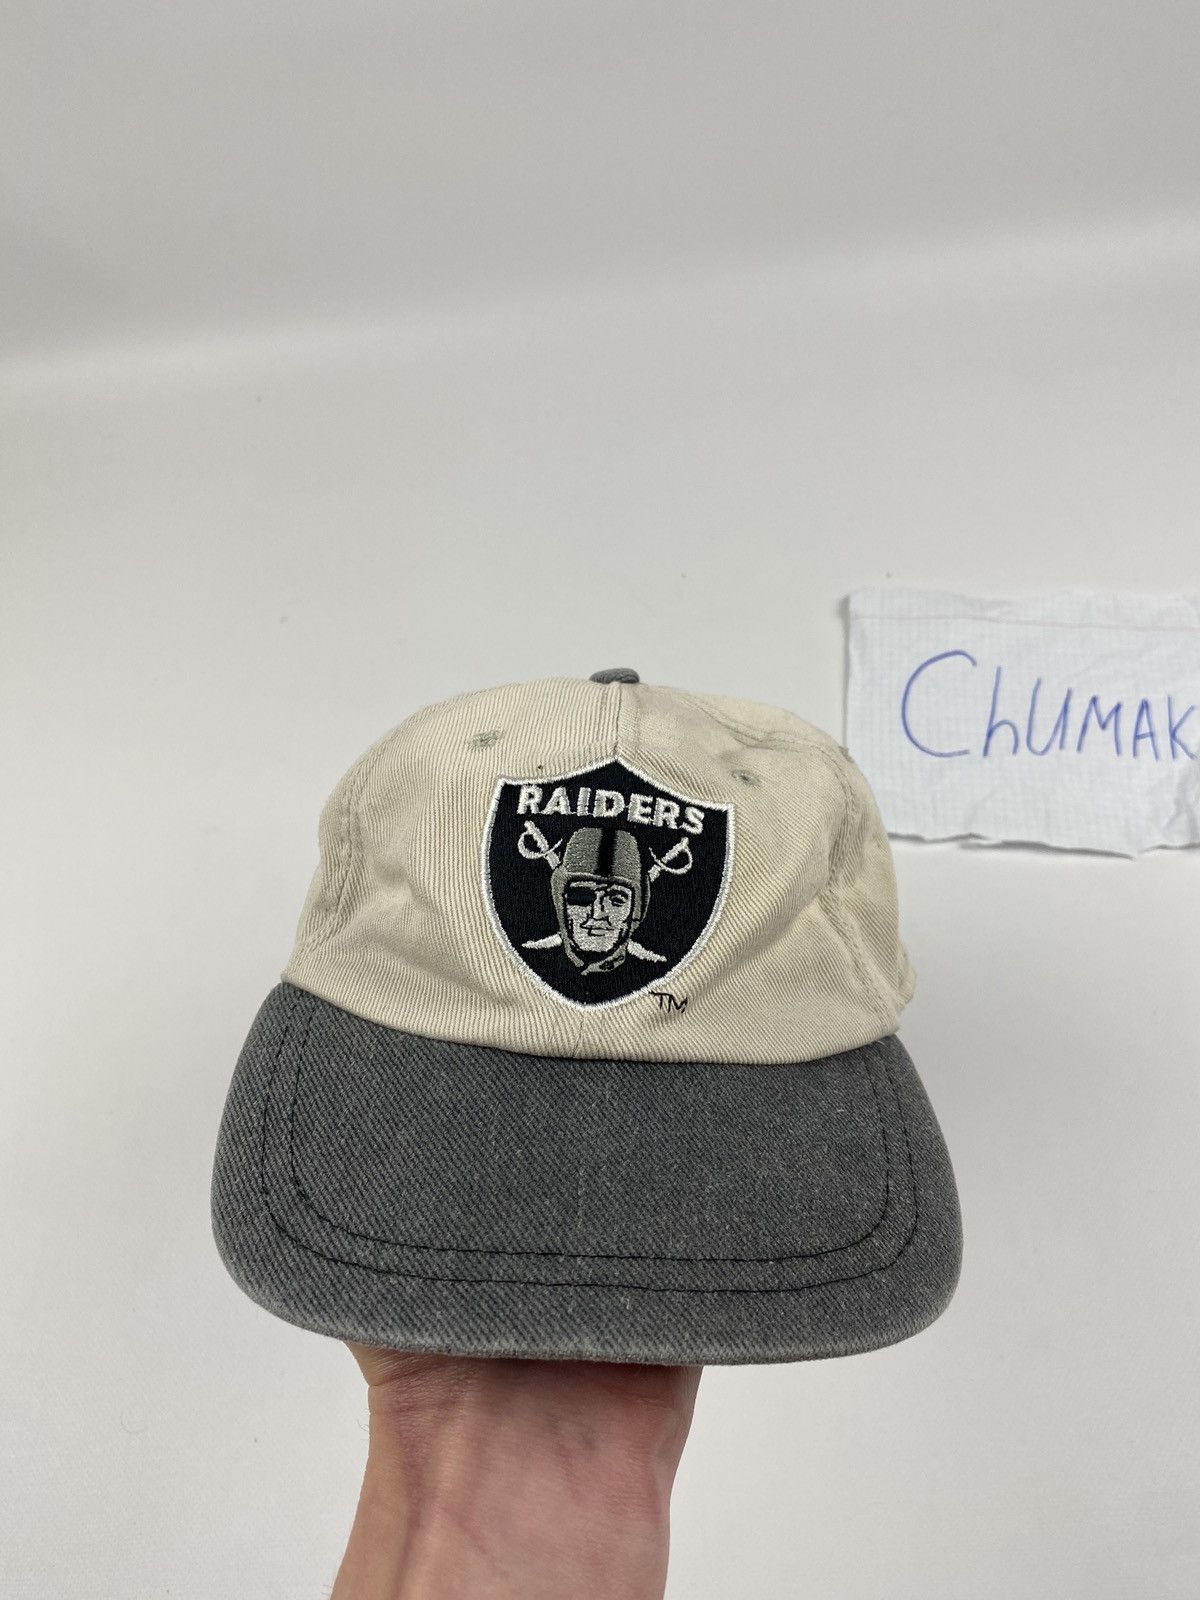 Pre-owned Nhl X Oakland Raiders Vintage 90's Oakland Raiders Annco Logo Snapback Hat In Brown